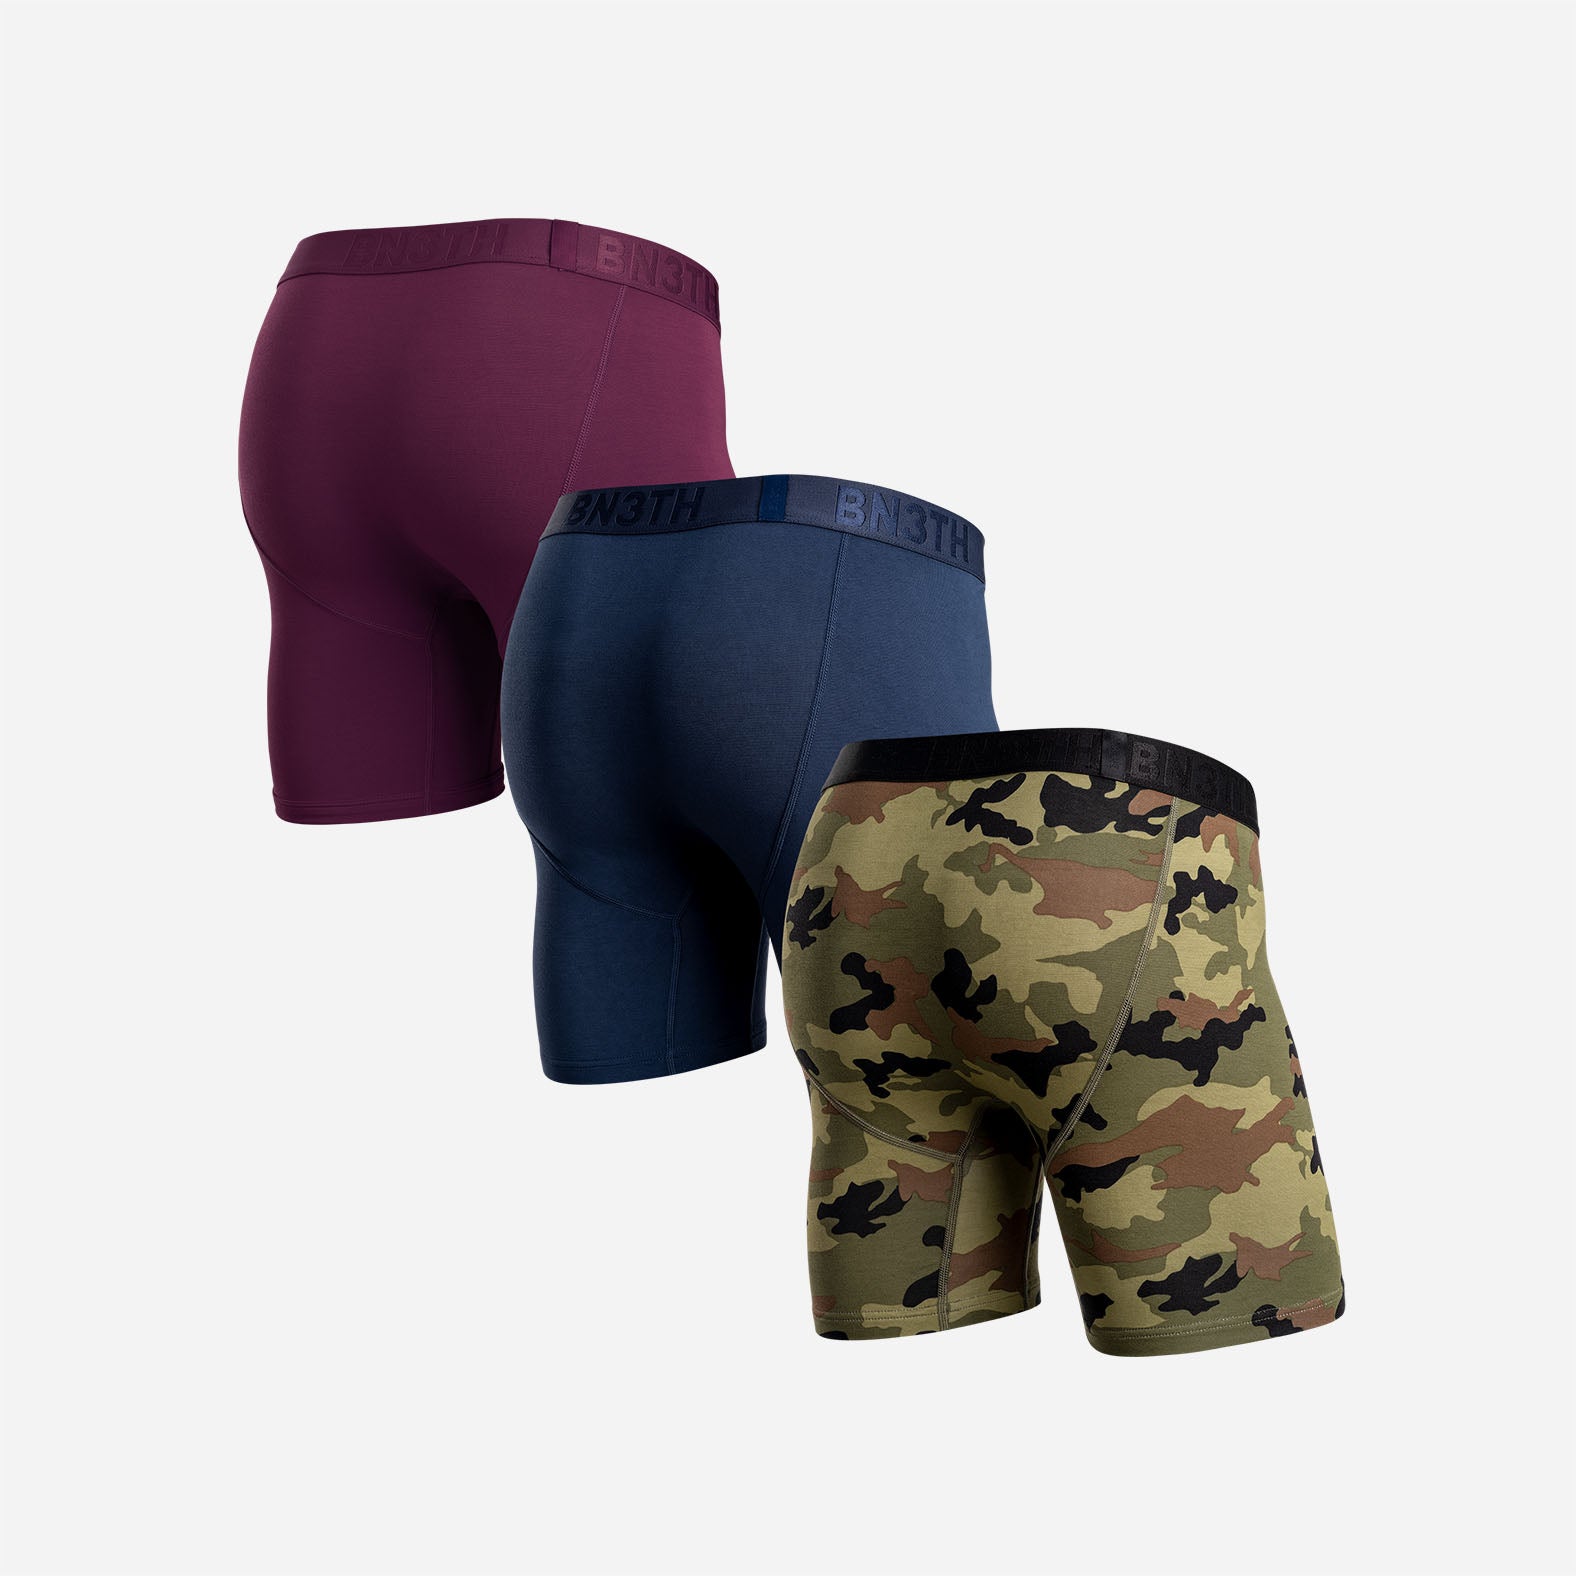 CLASSIC BOXER BRIEF: NAVY/CABERNET/CAMO GREEN 3 PACK